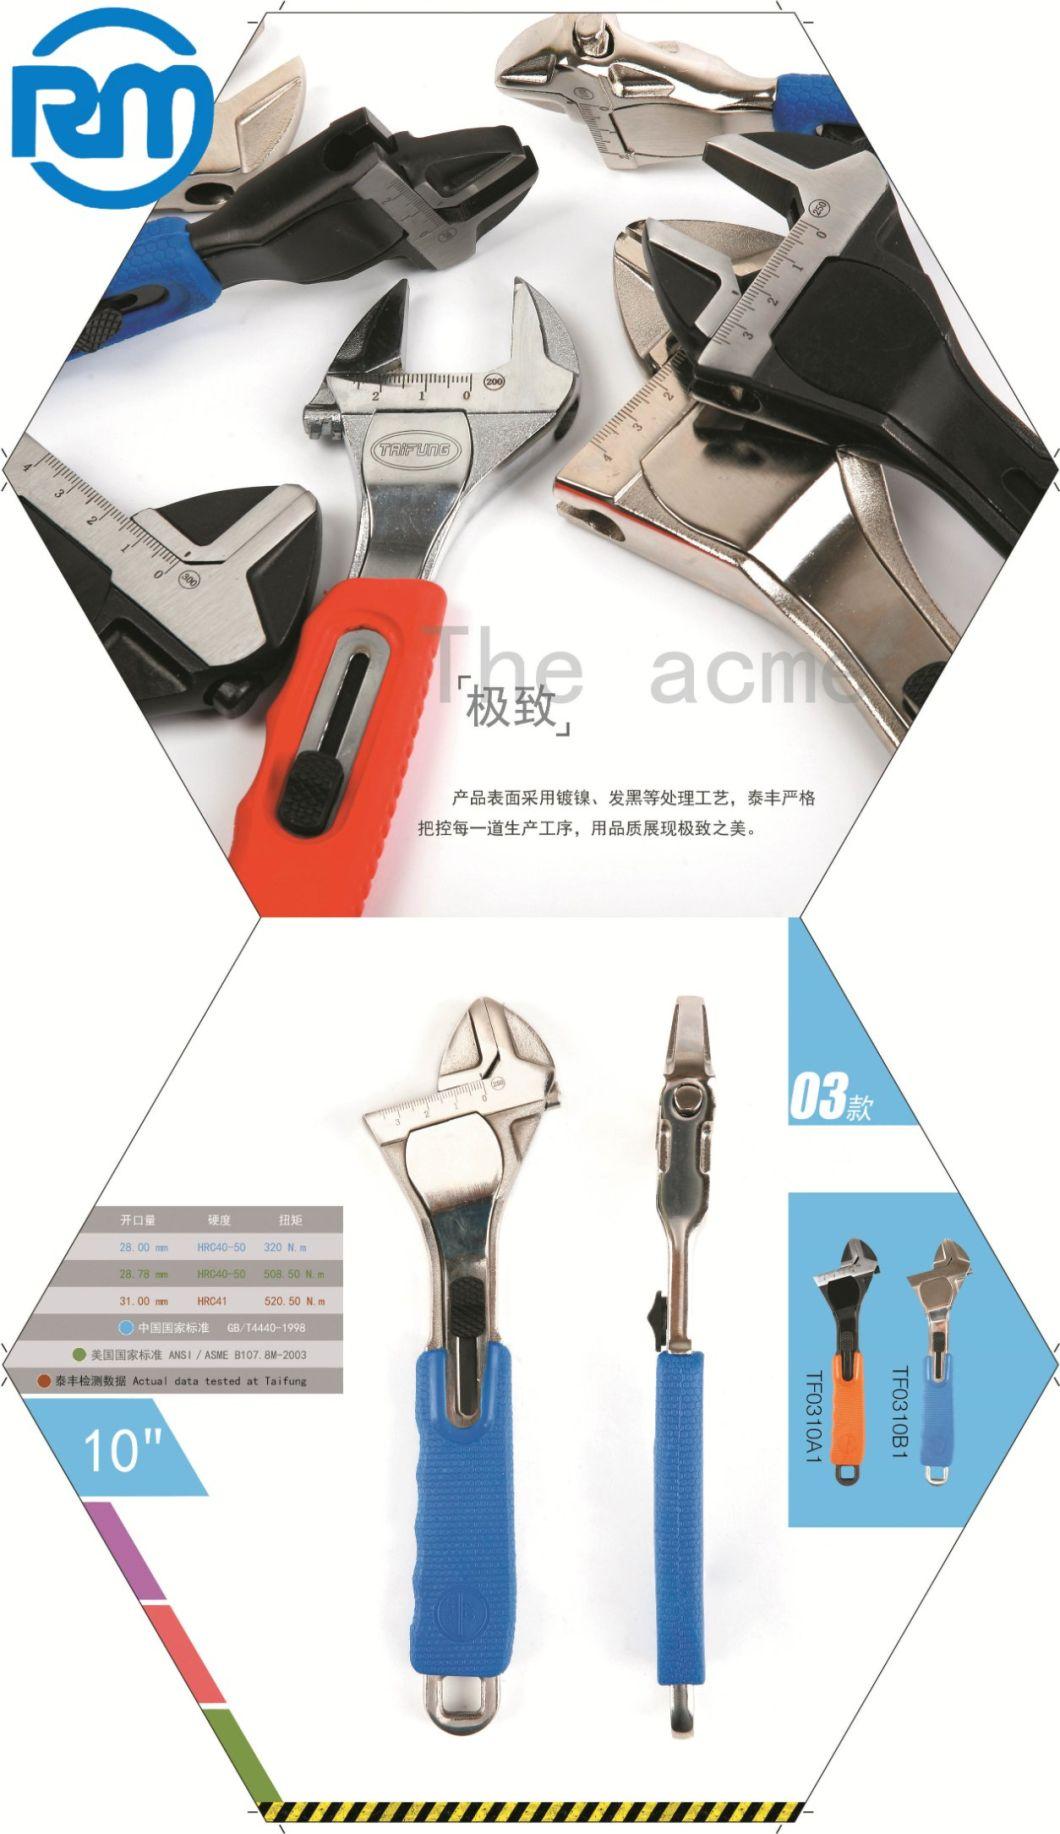 China Wholesale Alloy Steel Hex Allen Key Wrench Hot Sale Products Innovation Sliding Adjustment System